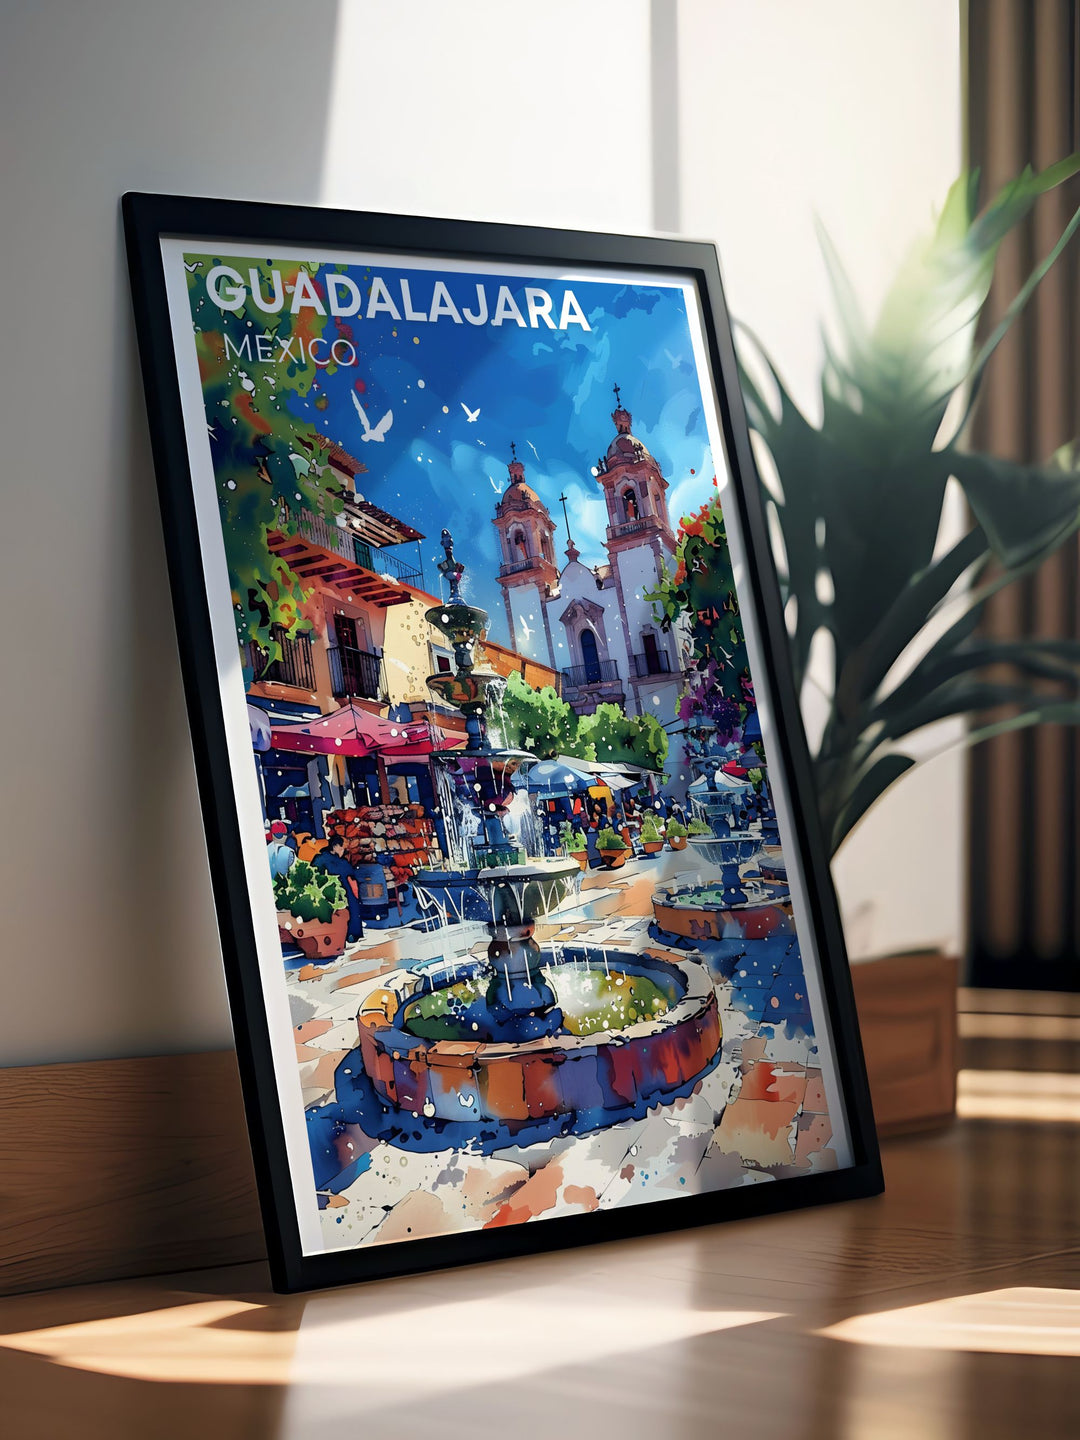 This travel poster of Guadalajara features the dynamic street scenes and colorful murals, bringing the citys vibrant spirit into your home decor.